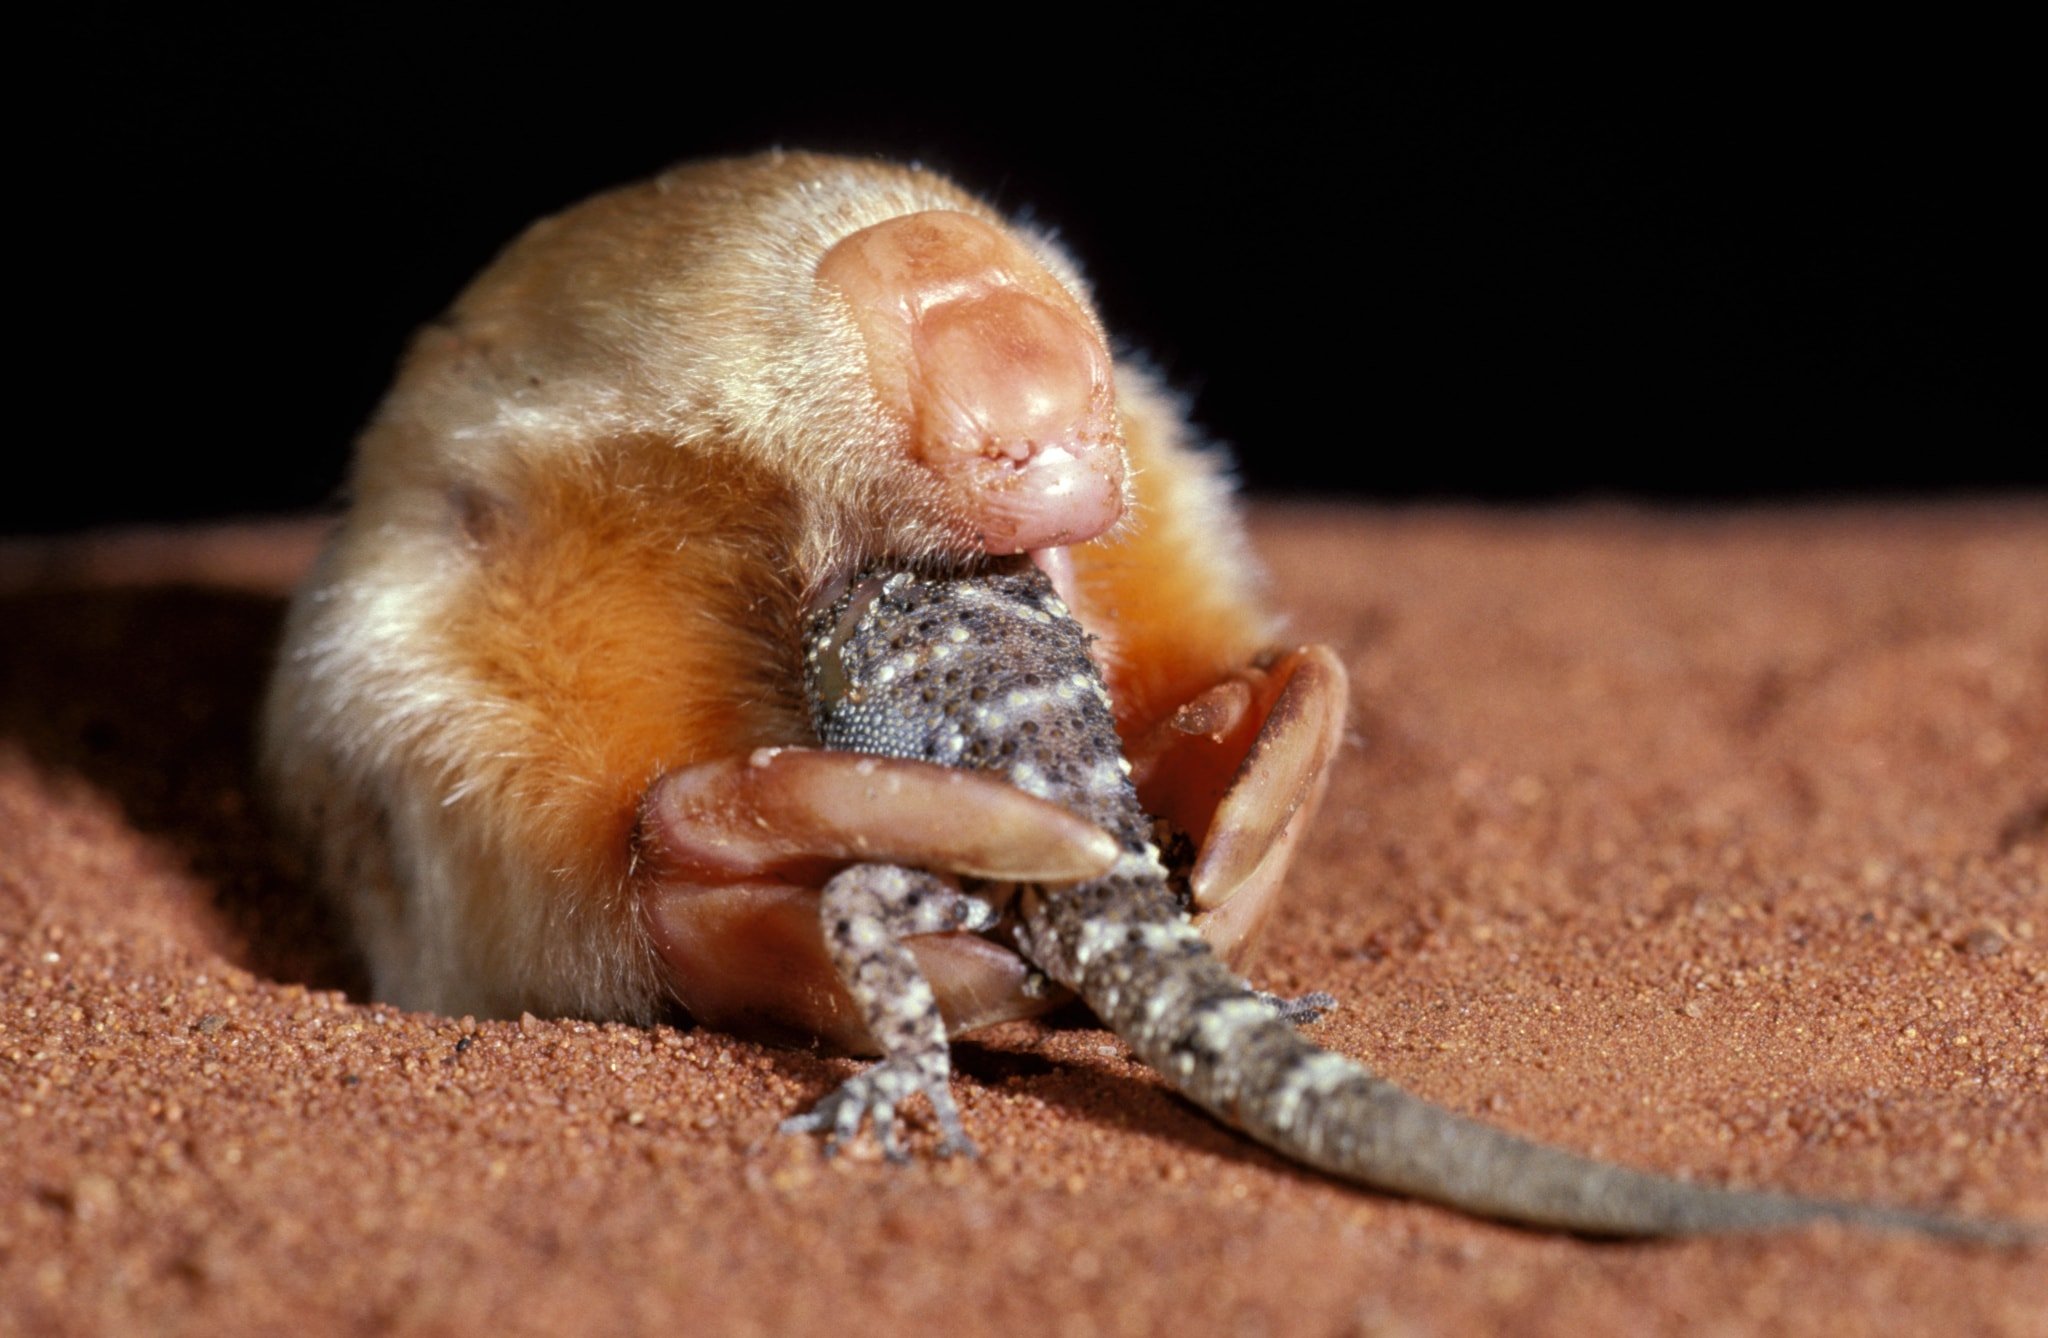 The southern marsupial mole is preposterous, even by Australian standards